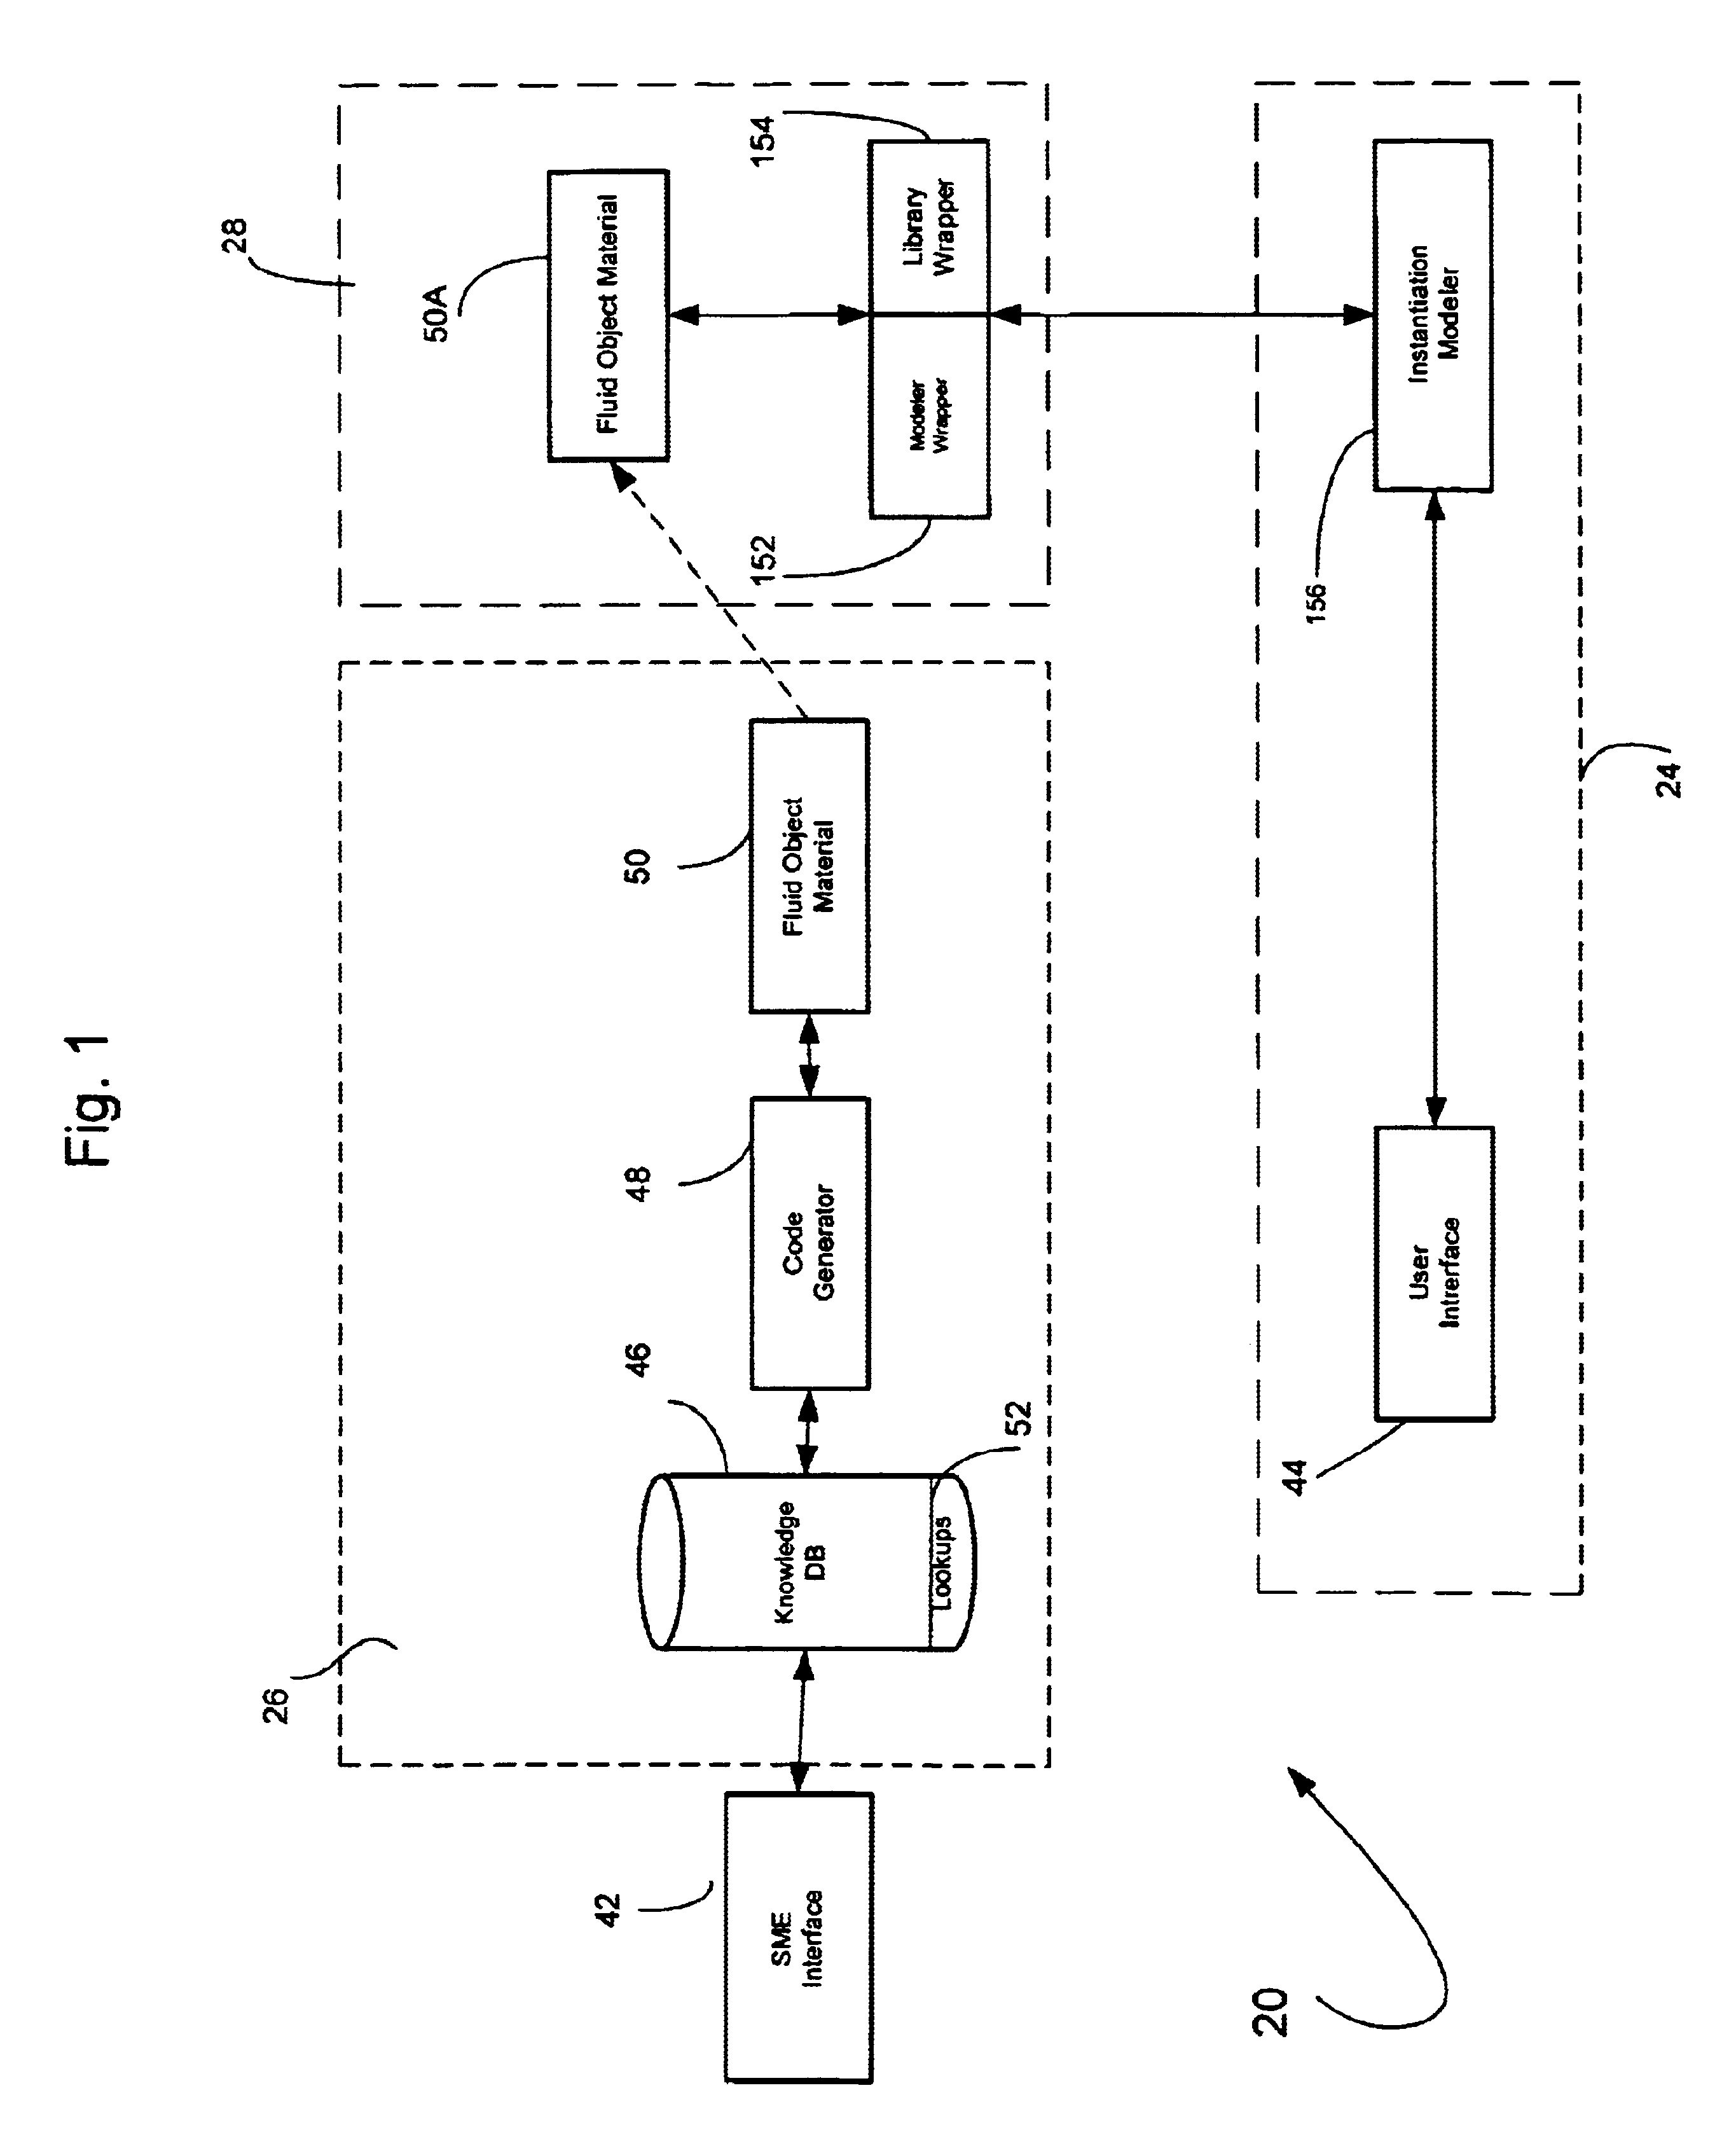 Computer system and method with adaptive N-level structures for automated generation of program solutions based on rules input by subject matter experts